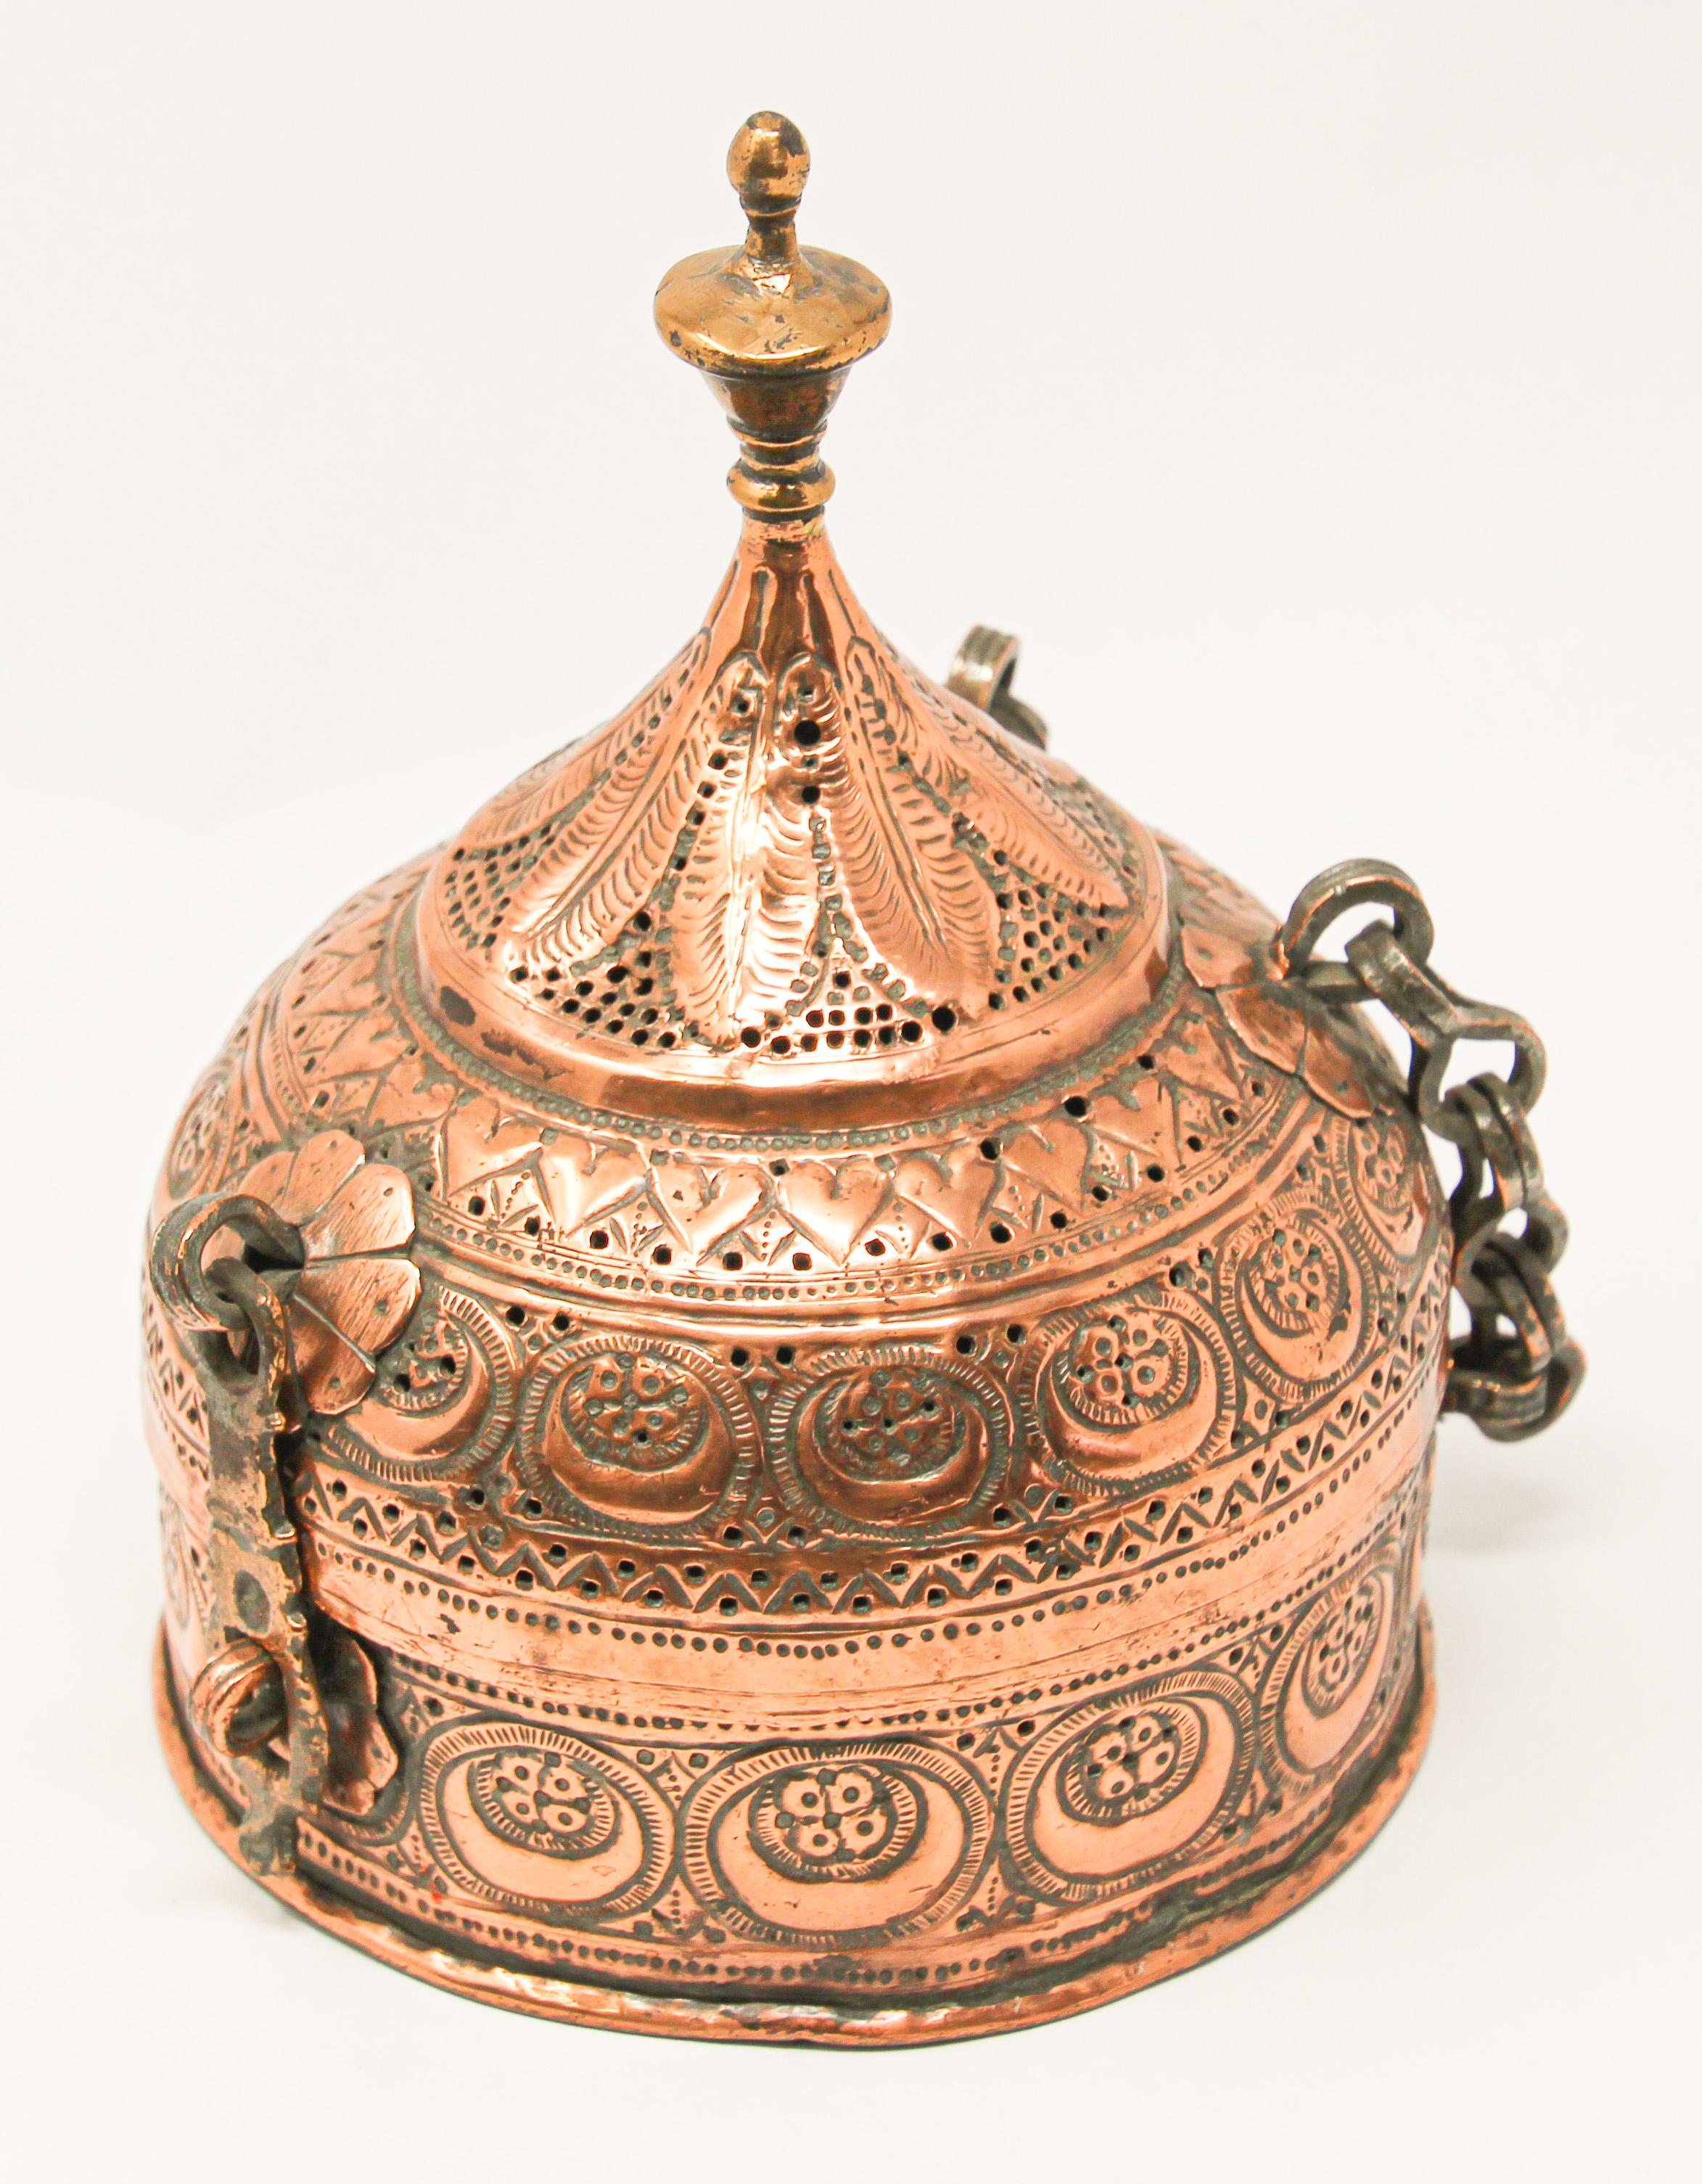 Rajasthani Mughal Decorative Copper Lidded Betel Spice Pandan Caddy Box.
Handcrafted decorative North India round metal Asian copper Mughal Raj, Indian lidded , spice, pandan betel box with latch and a top handle.
Of dome form with lotus-shaped